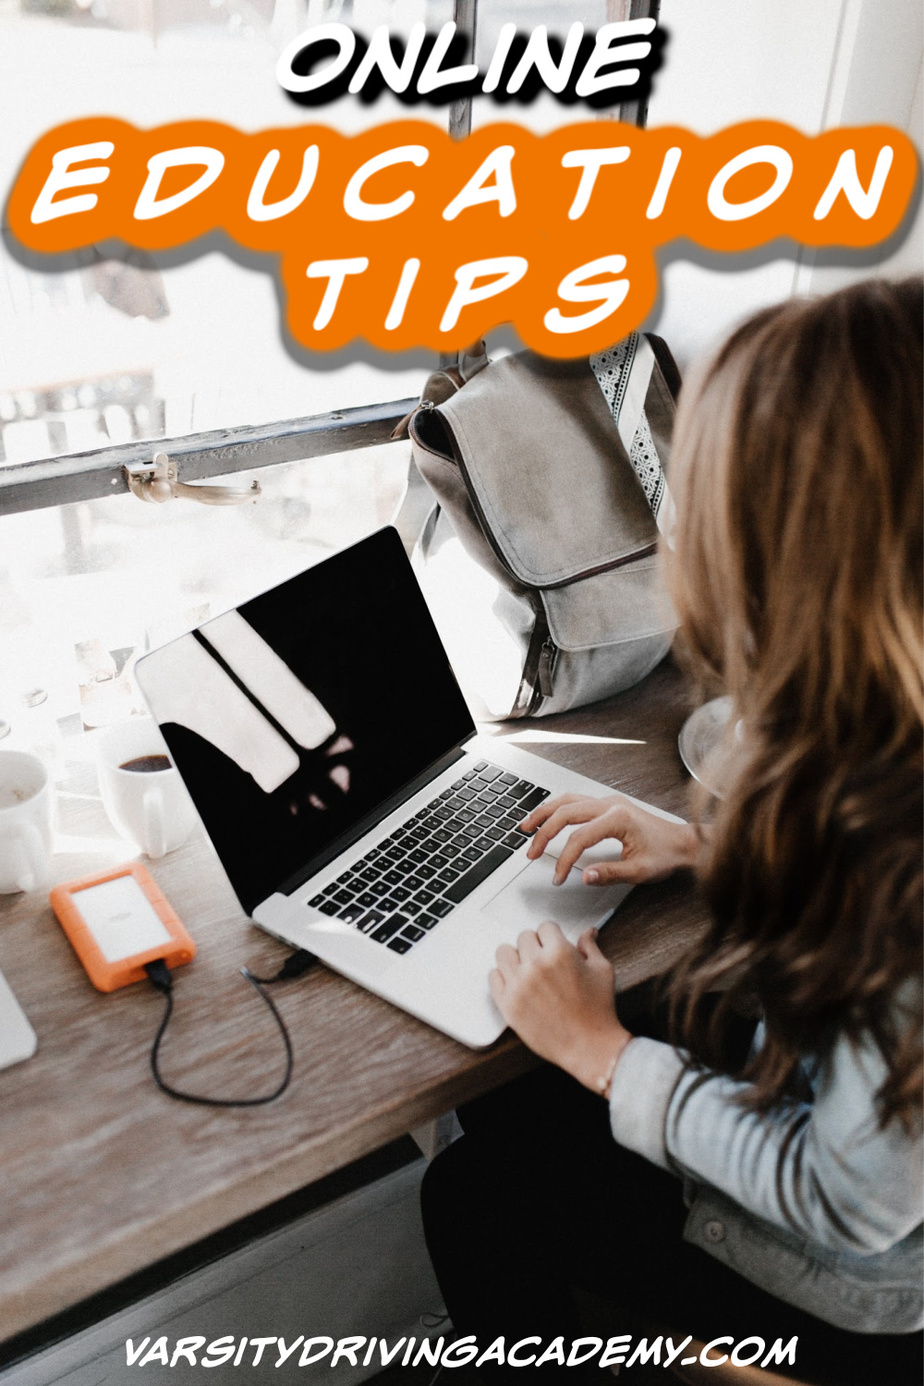 Utilize online education tech tips that help you study online, learn when you have the time, and succeed with your goals.